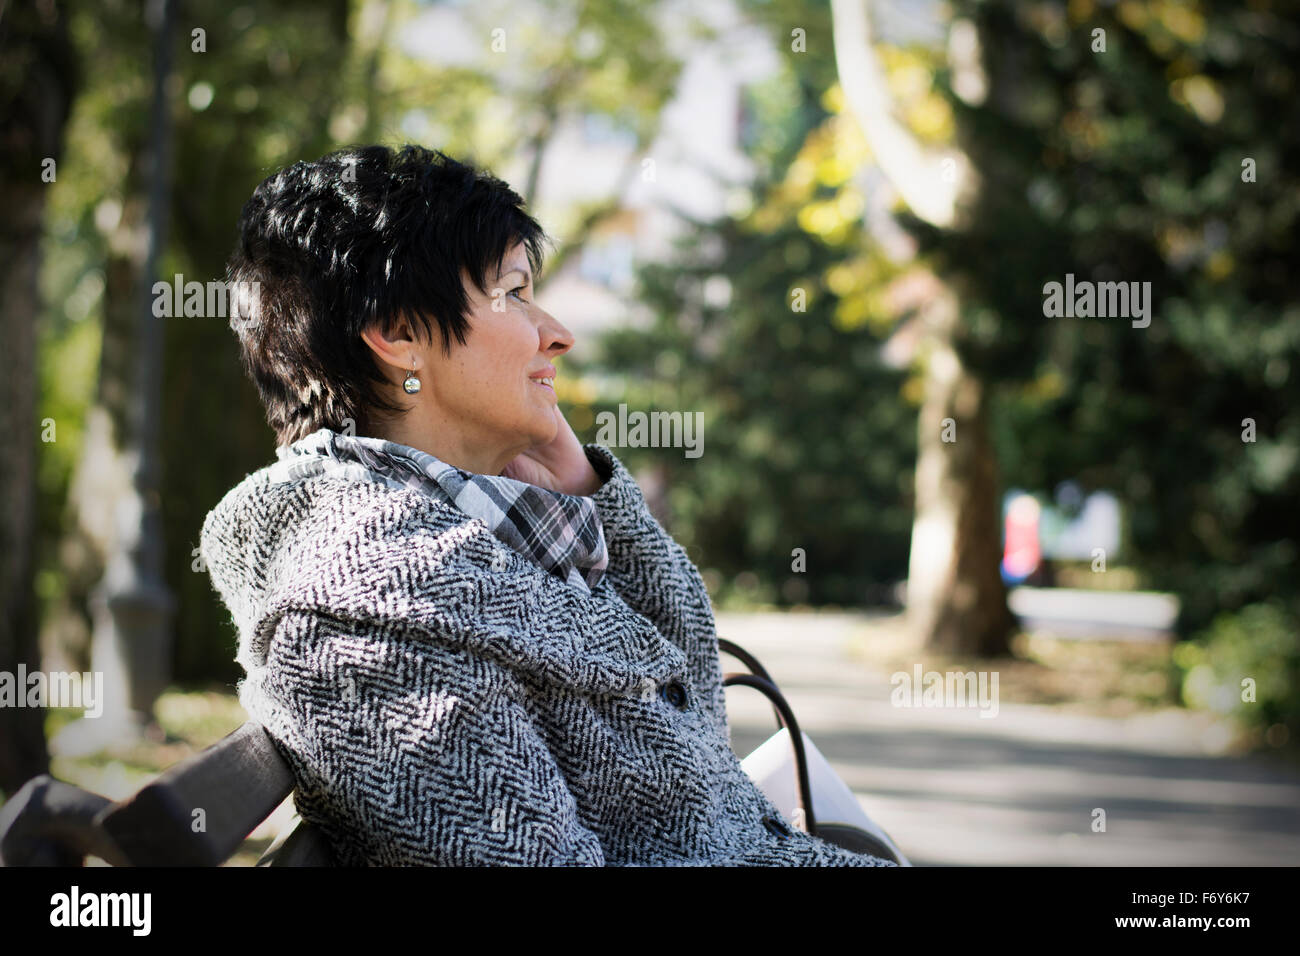 Beautiful middleaged woman with short dark haircut using device in park Stock Photo